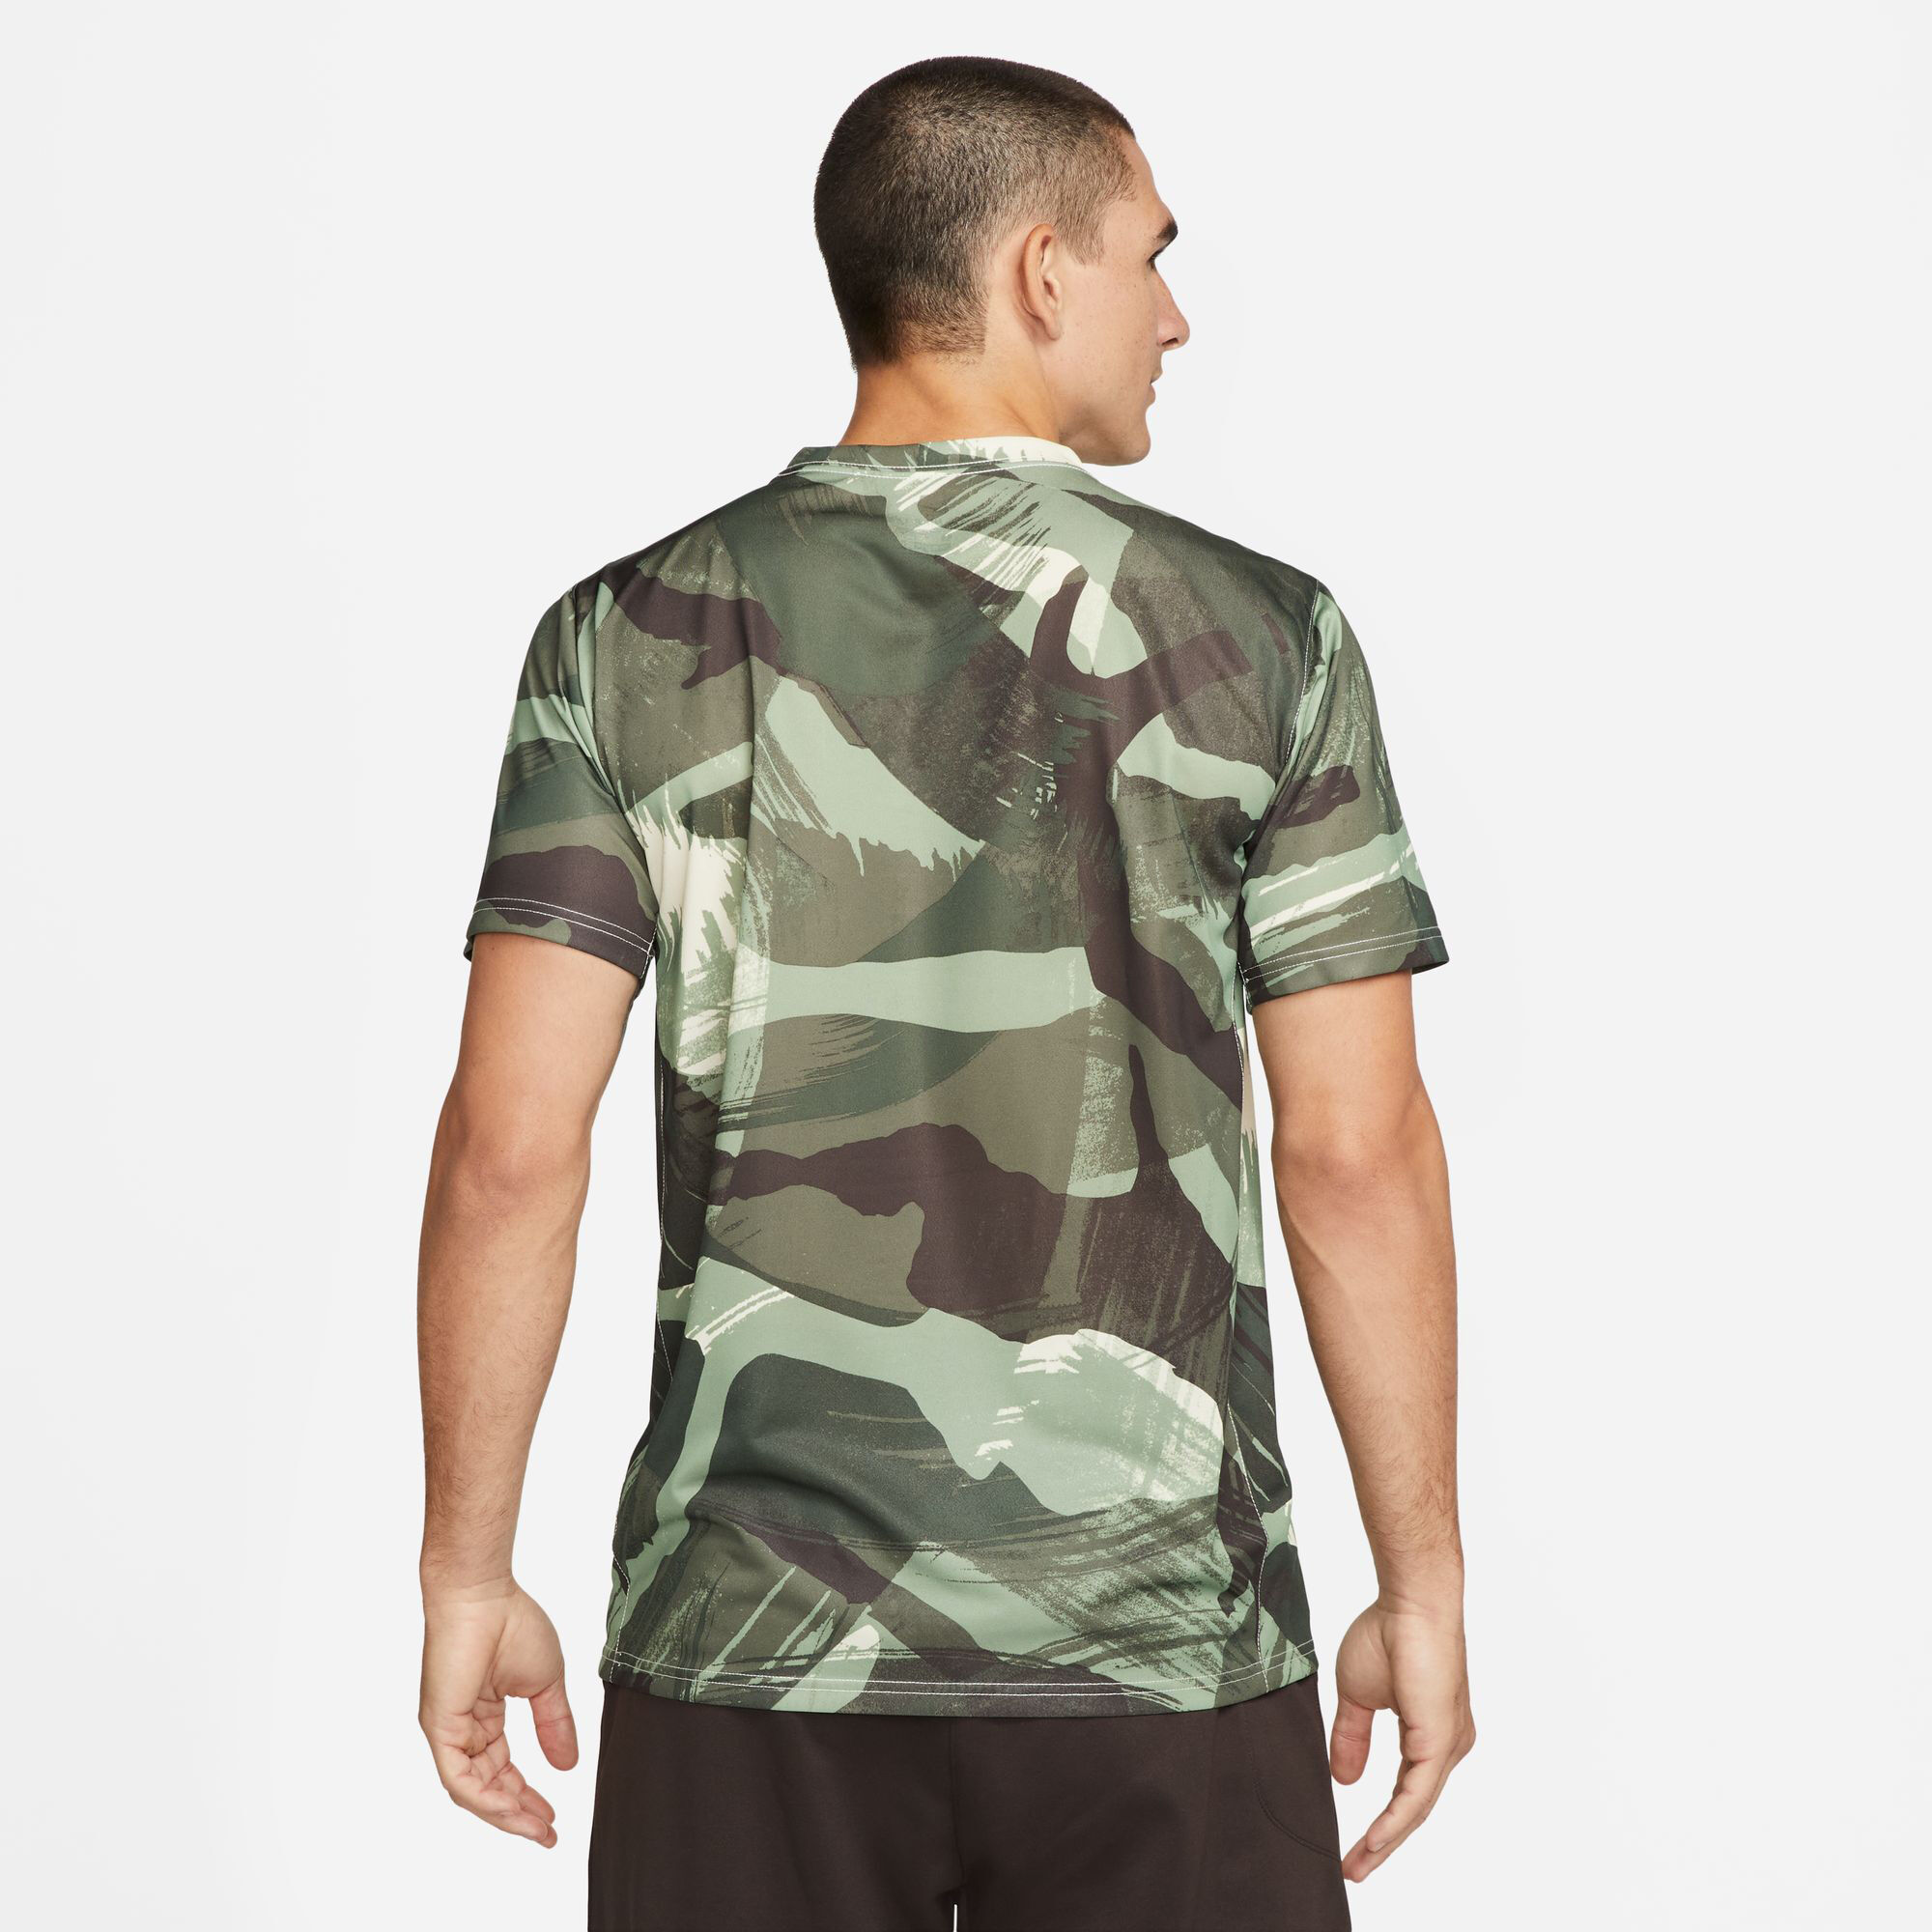 buy Nike Dri-Fit Legend Camouflage All Over Print T-Shirt Men - Olive ...